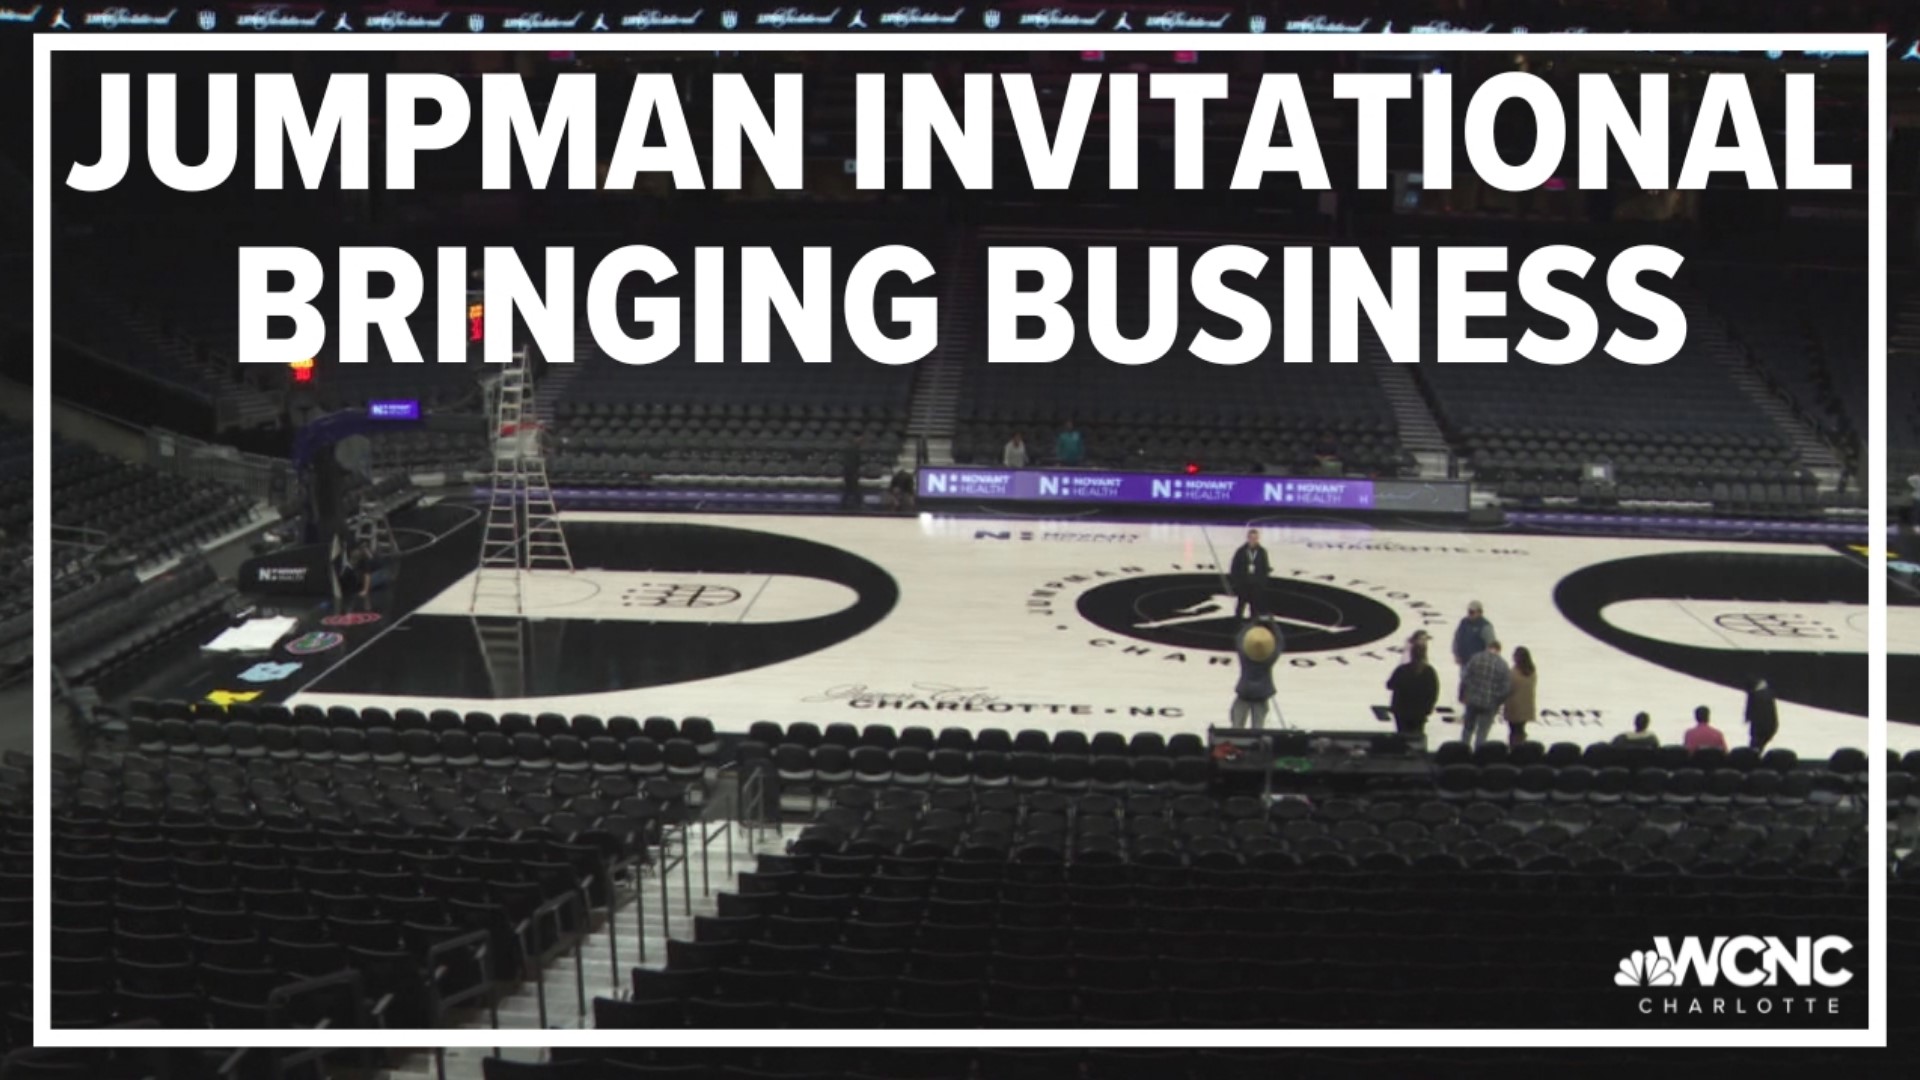 The first ever Jumpman Invitational is in Charlotte. Organizers hope to jumpstart more opportunities with this inaugural event.